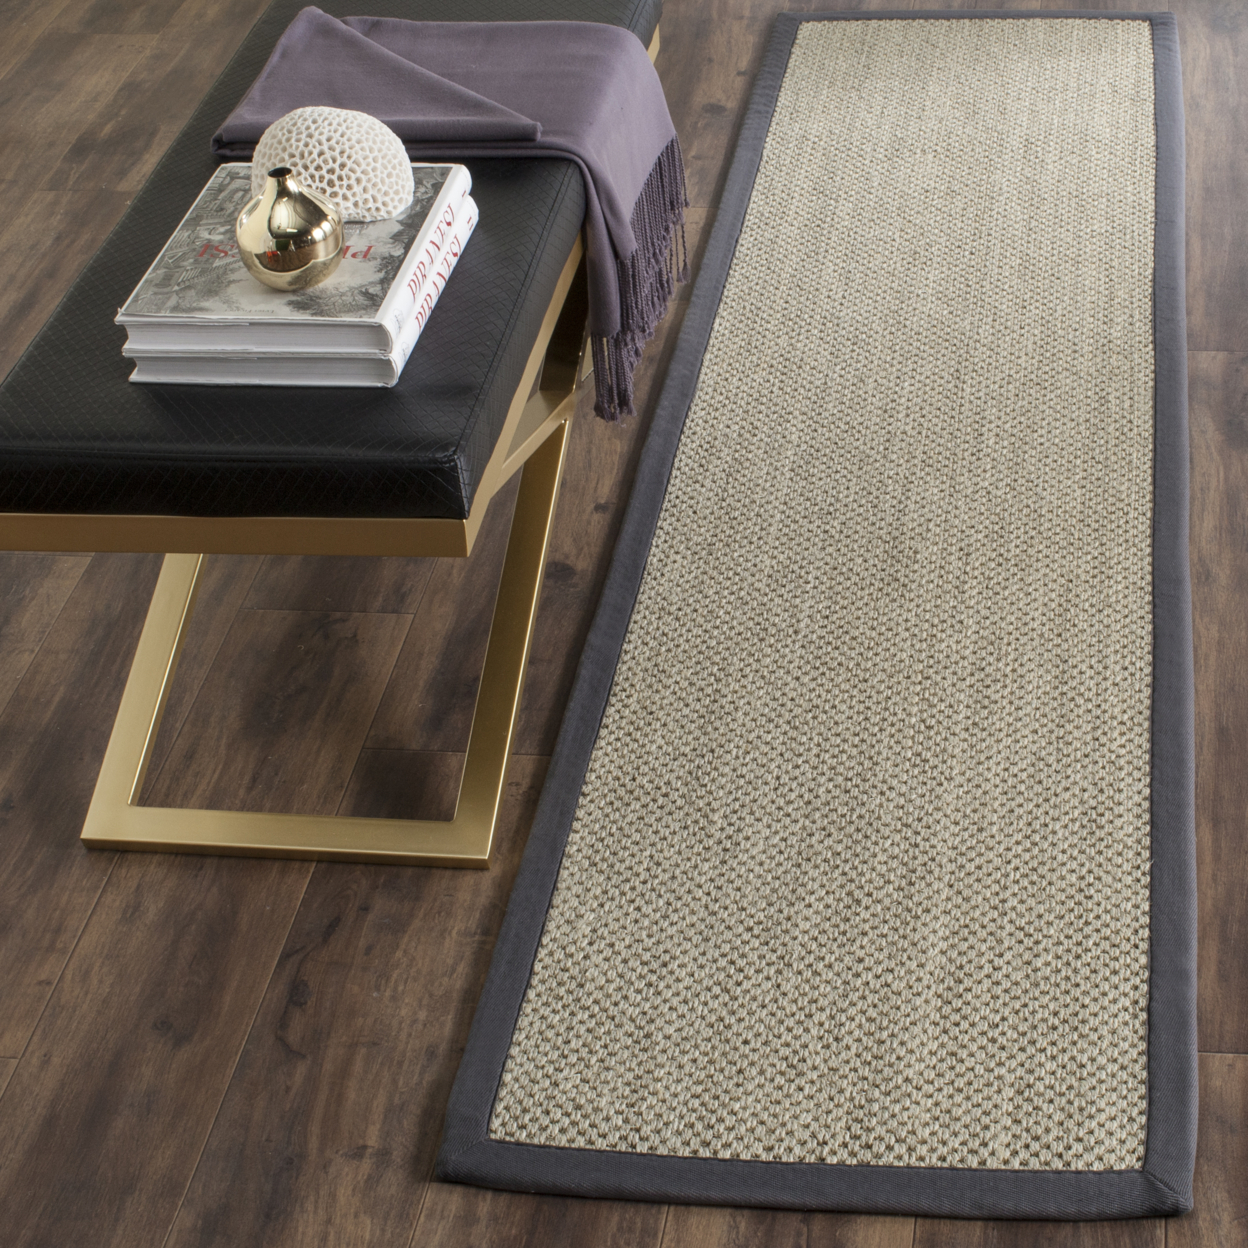 SAFAVIEH Natural Fiber Collection NF443B Marble/Grey Rug - 5' X 8'